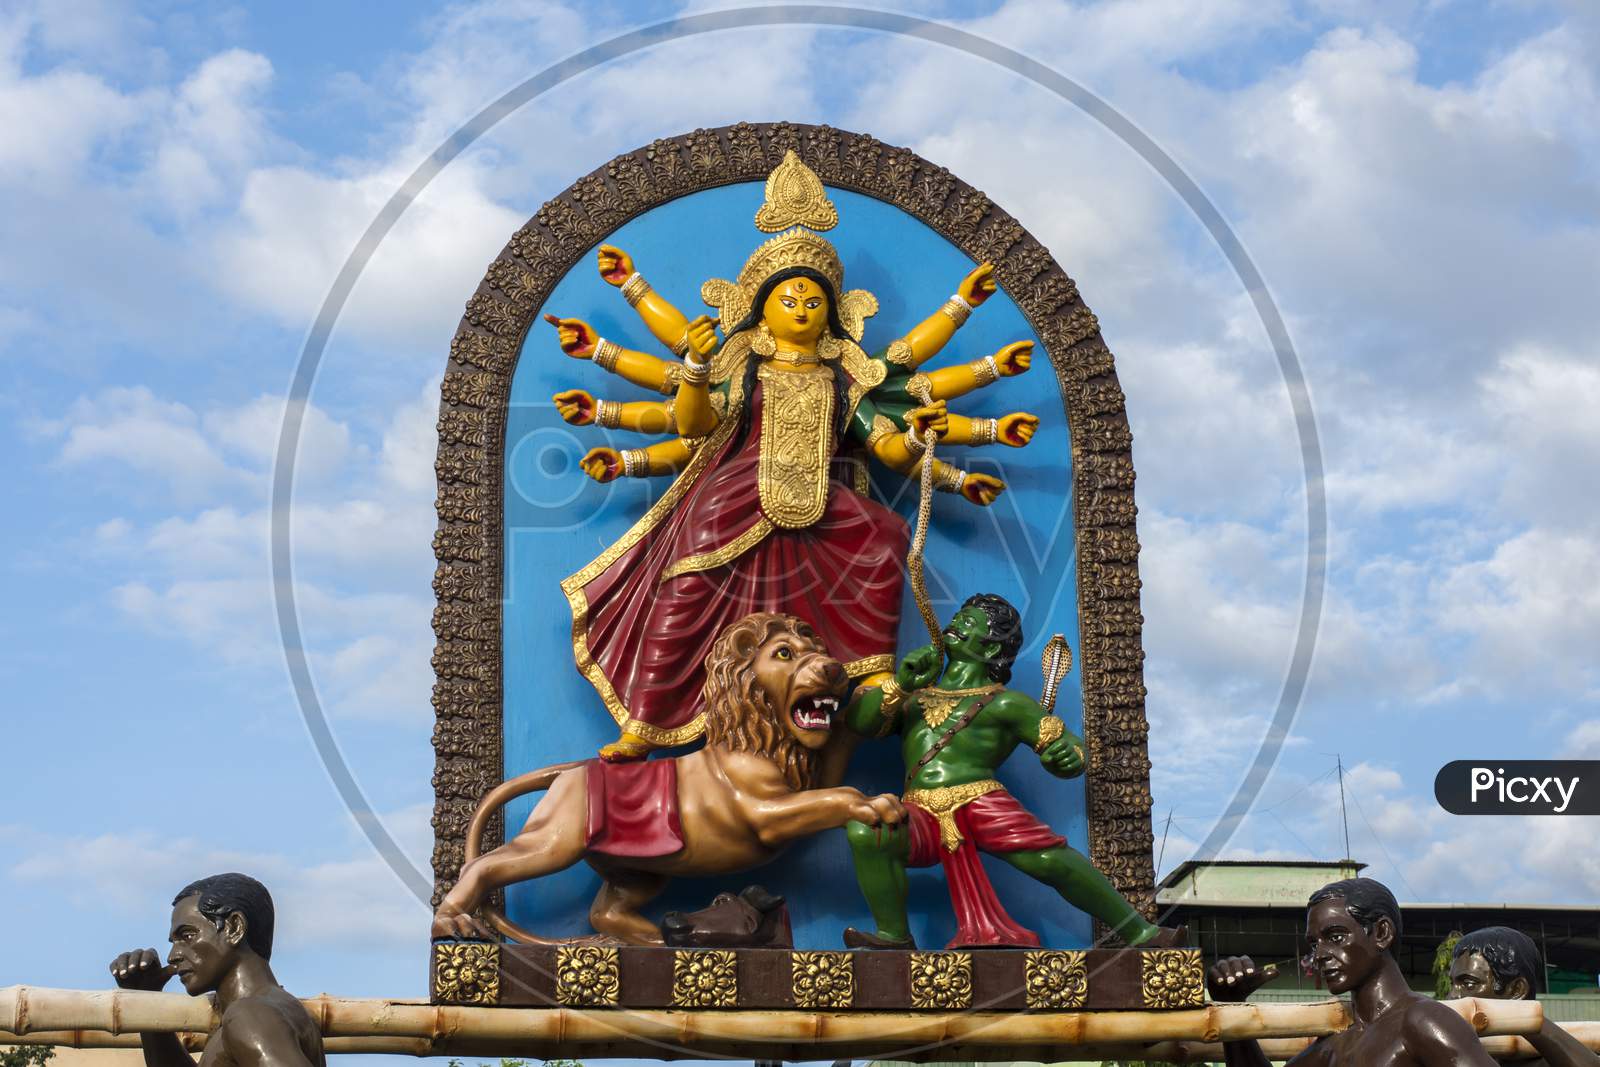 Statues Of Few Porters Carrying Goddess Durga On Their Solder To Decorate City Kolkata In The Process Of Beautification.